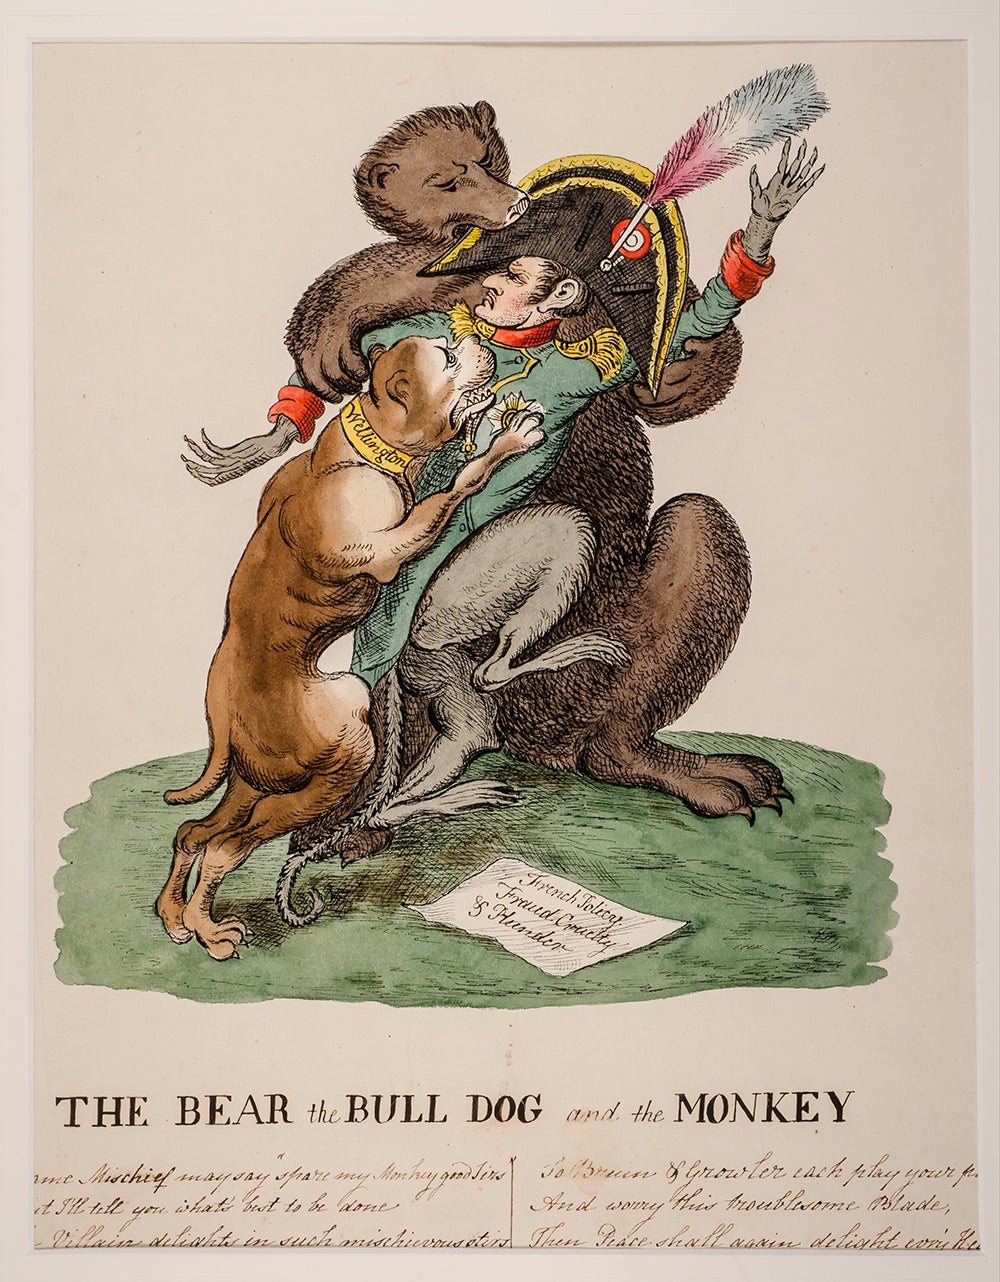 HEATH, William, (after) - The Bear the Bull Dog and the Monkey